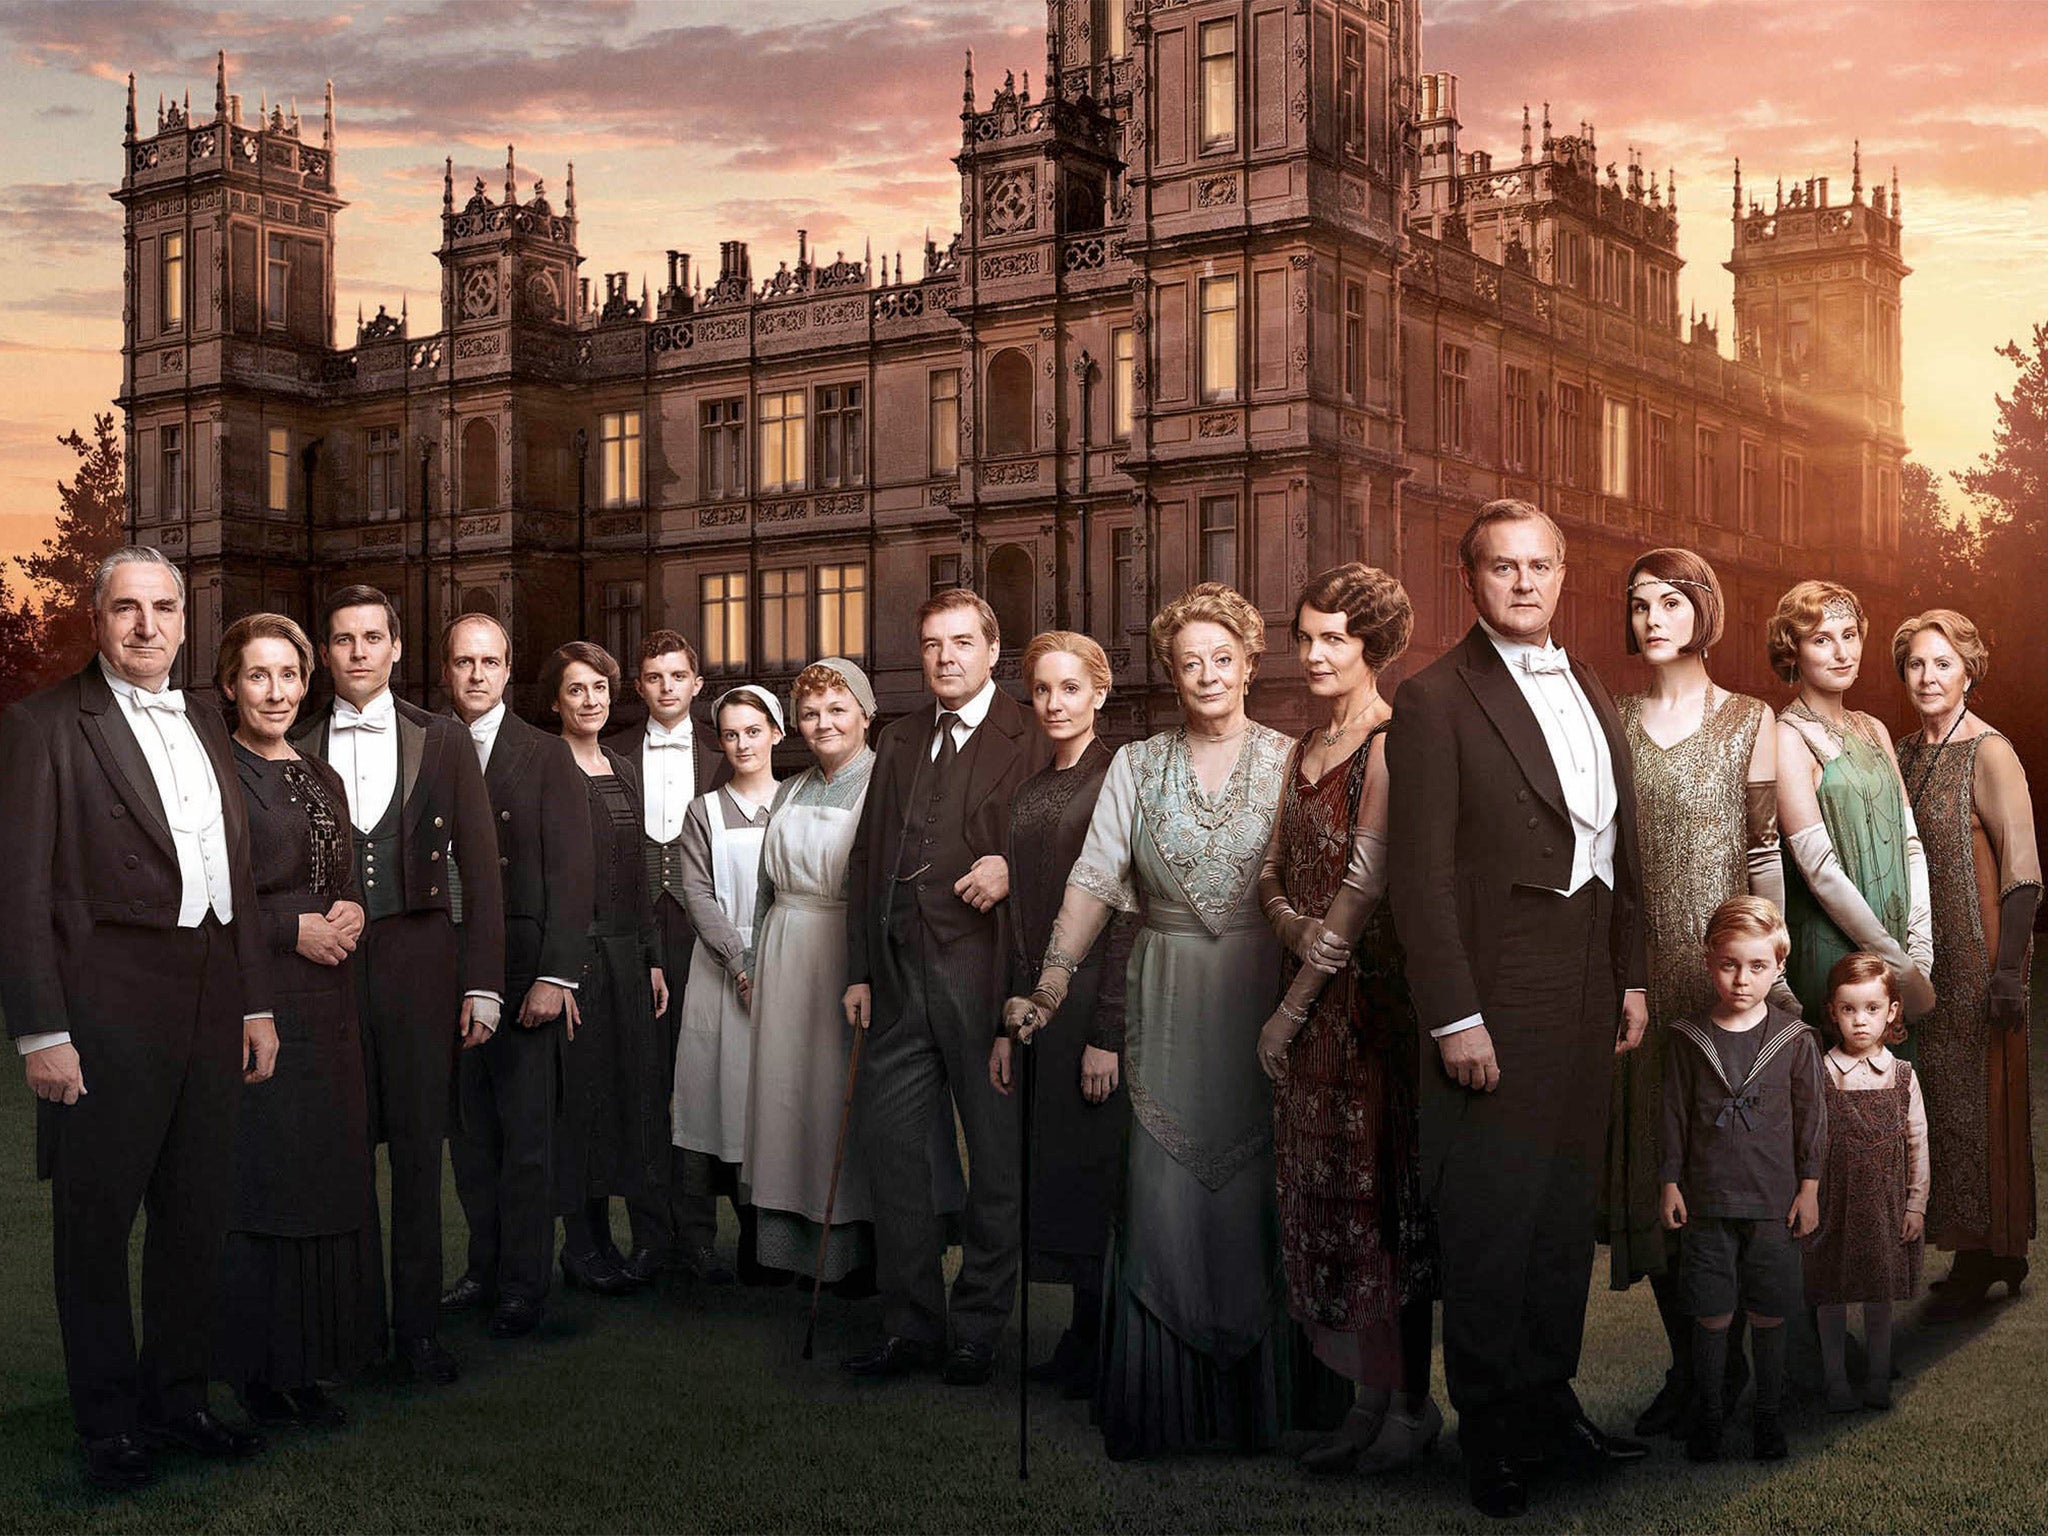 Global phenomenon: Downton was aired in 250 territories worldwide